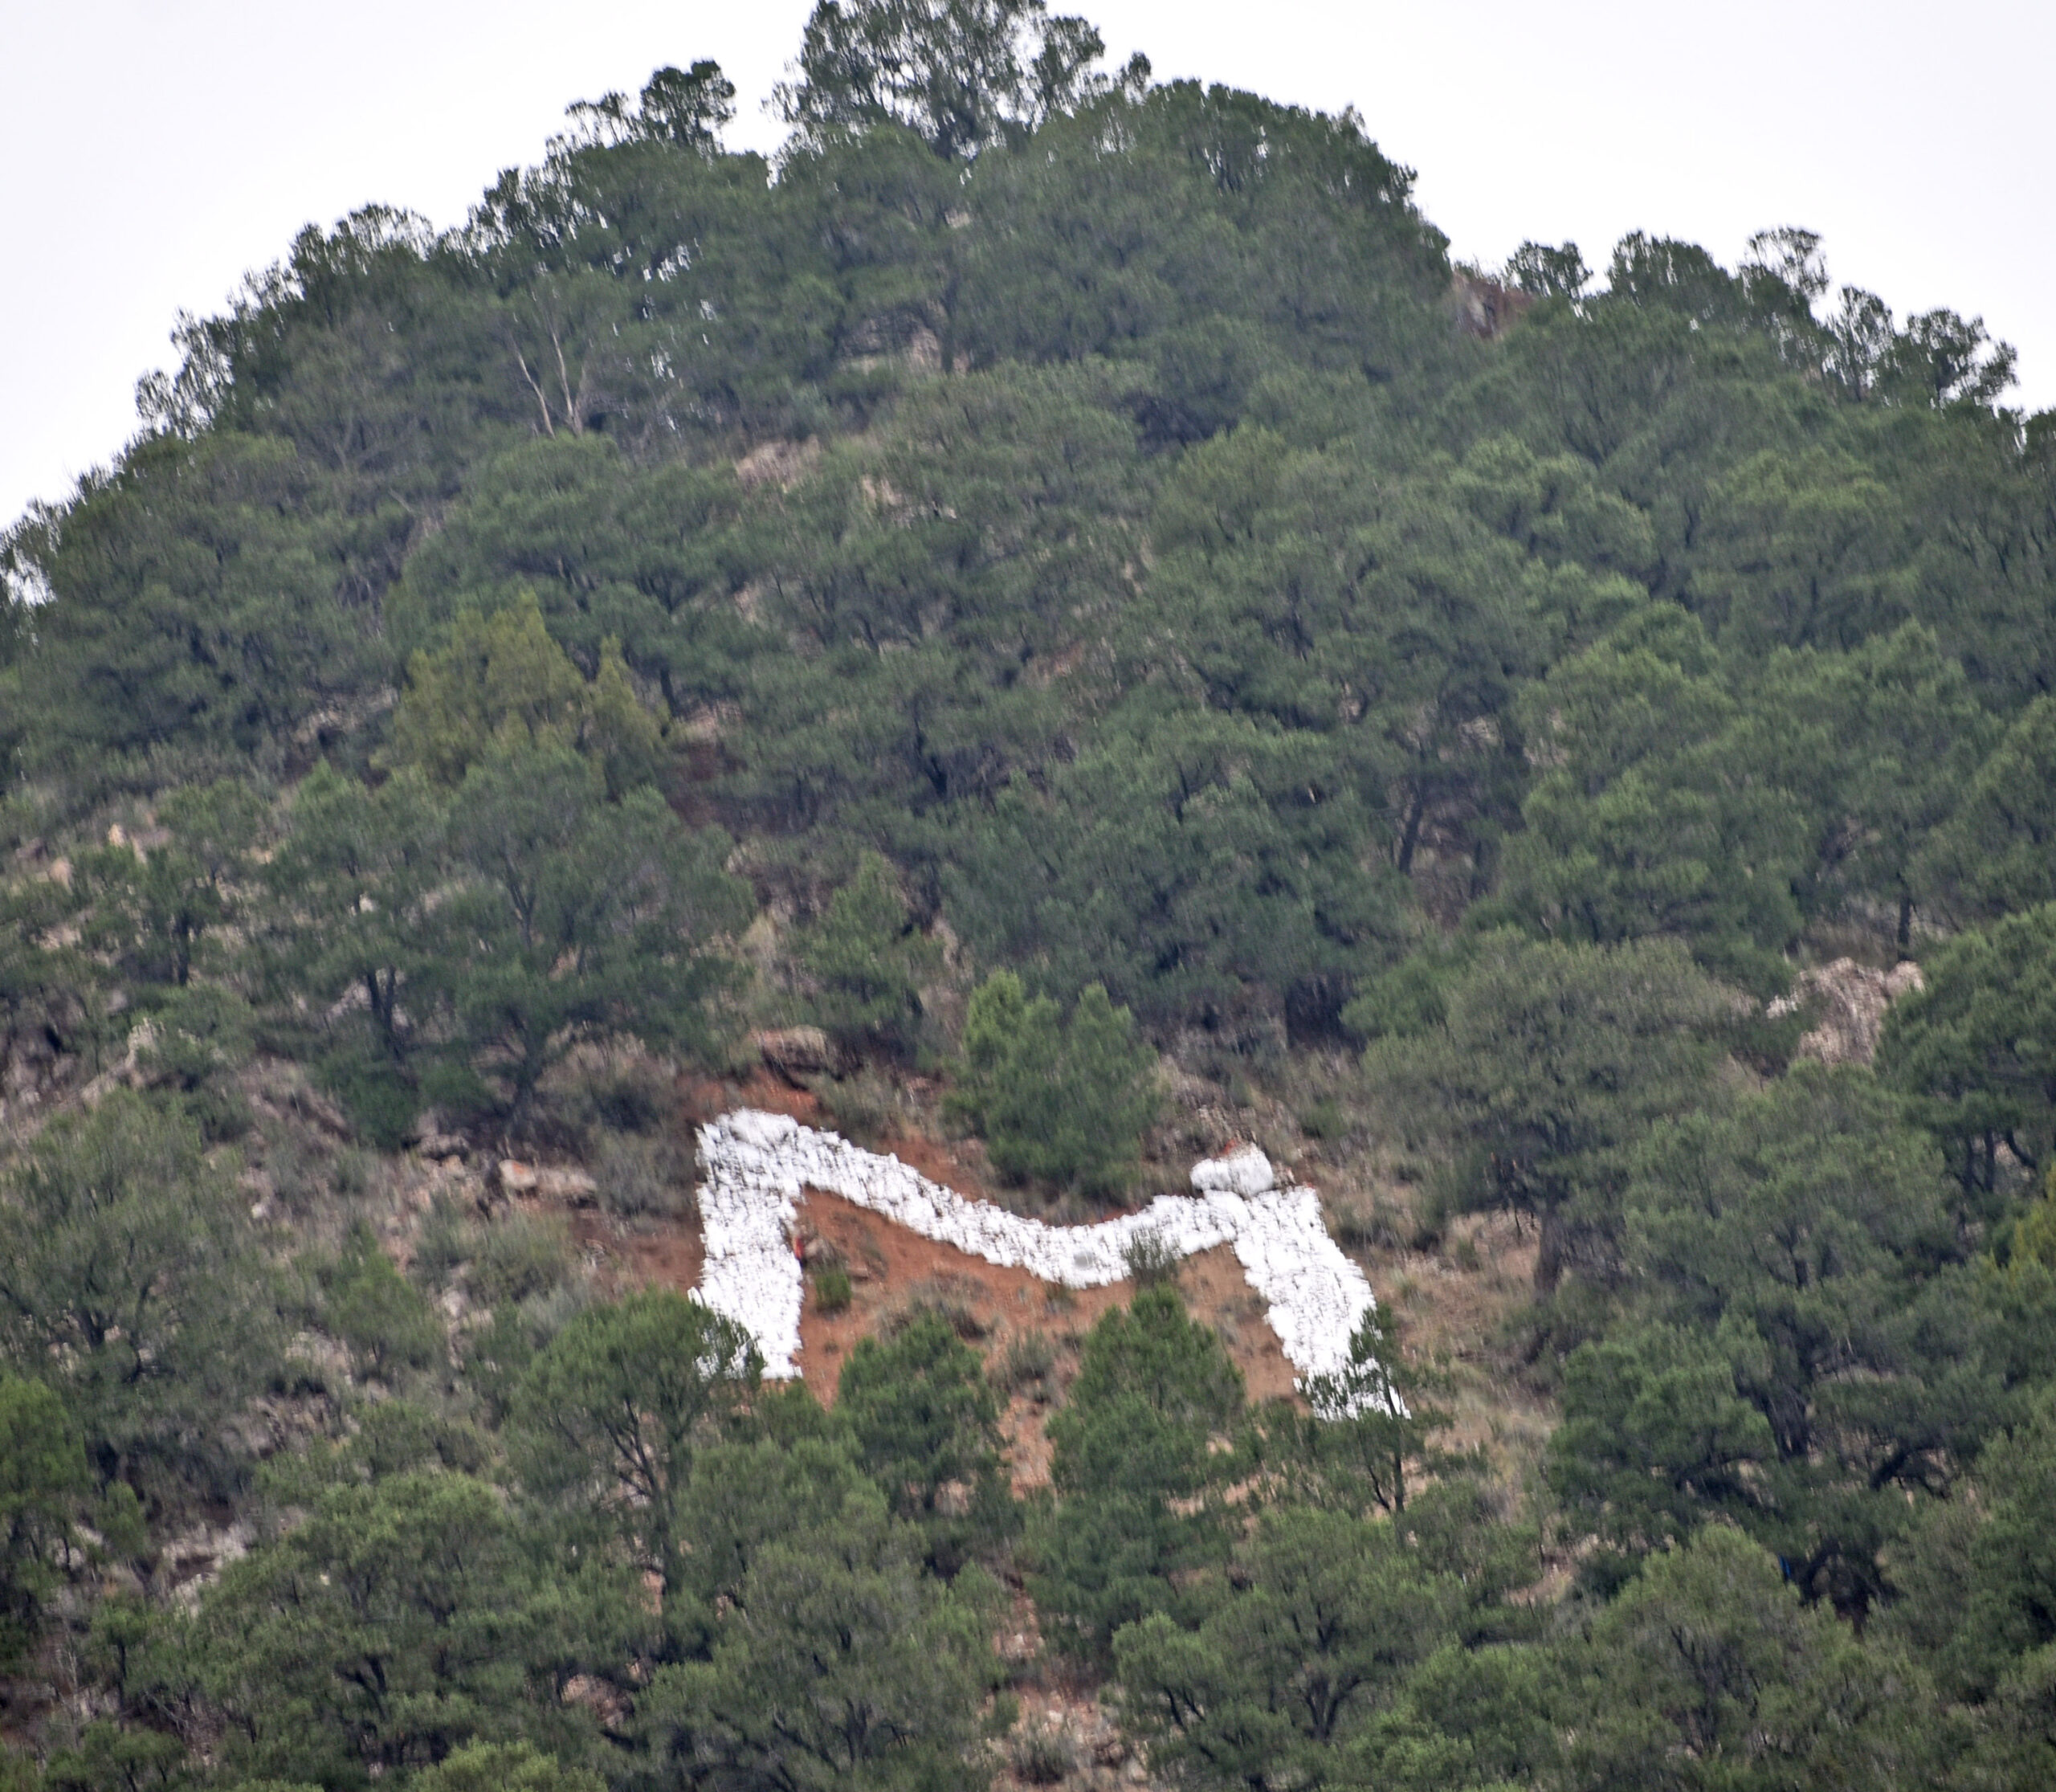 Photo by Rhonda Van Pelt. The M is in a wooded area on a hillside northwest of Manitou Springs.